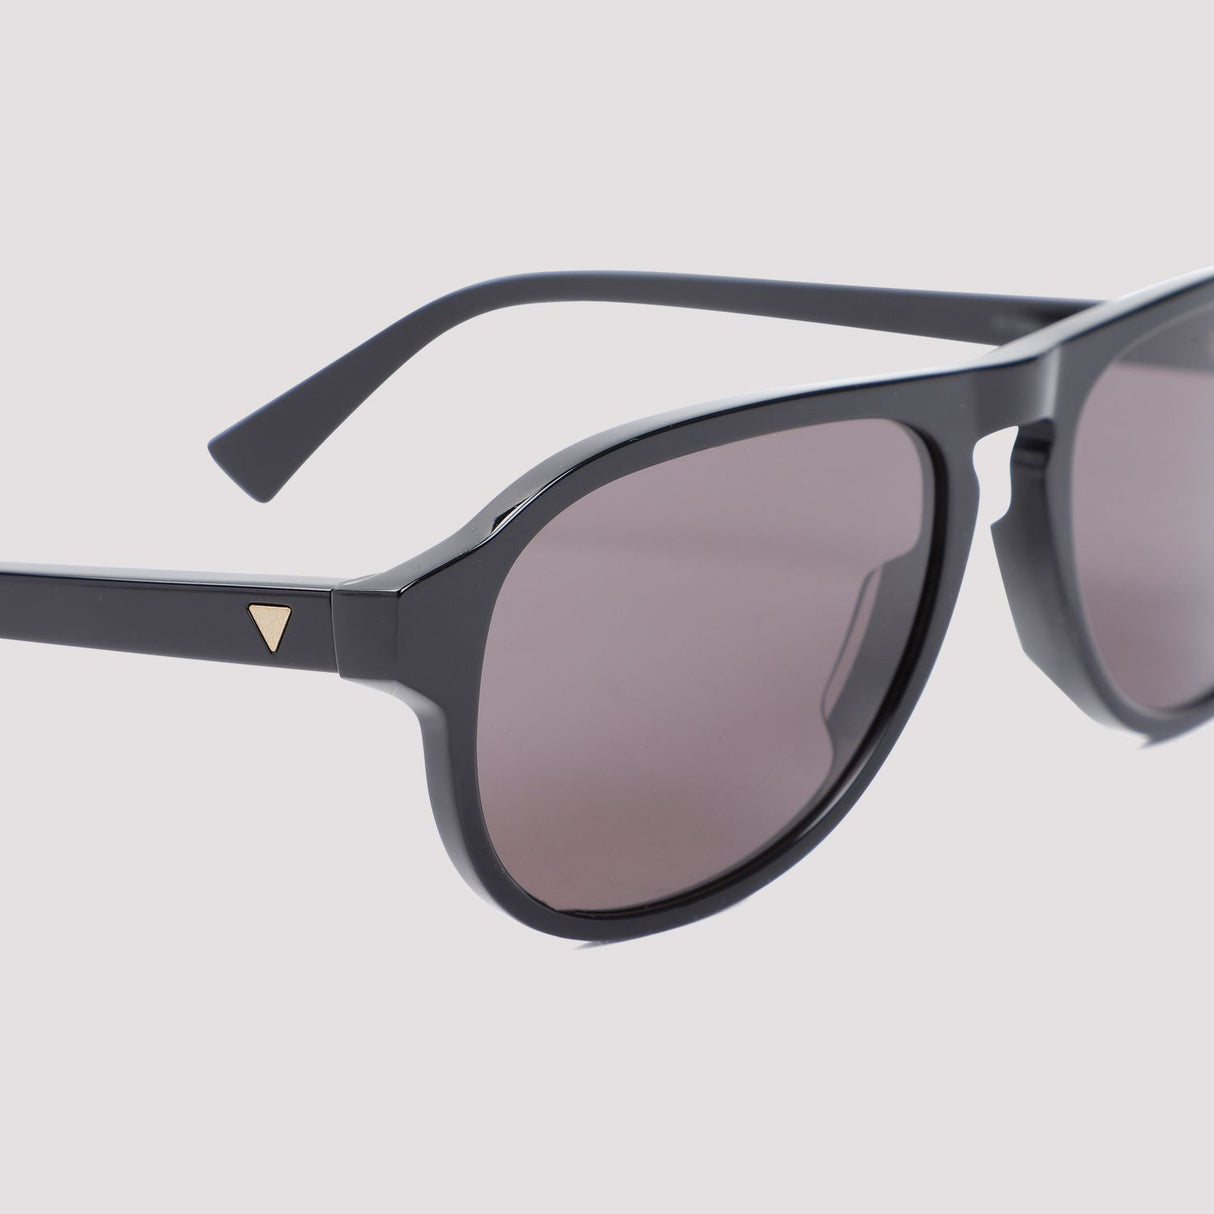 Stylish Black Sunglasses for Women - SS24 Collection